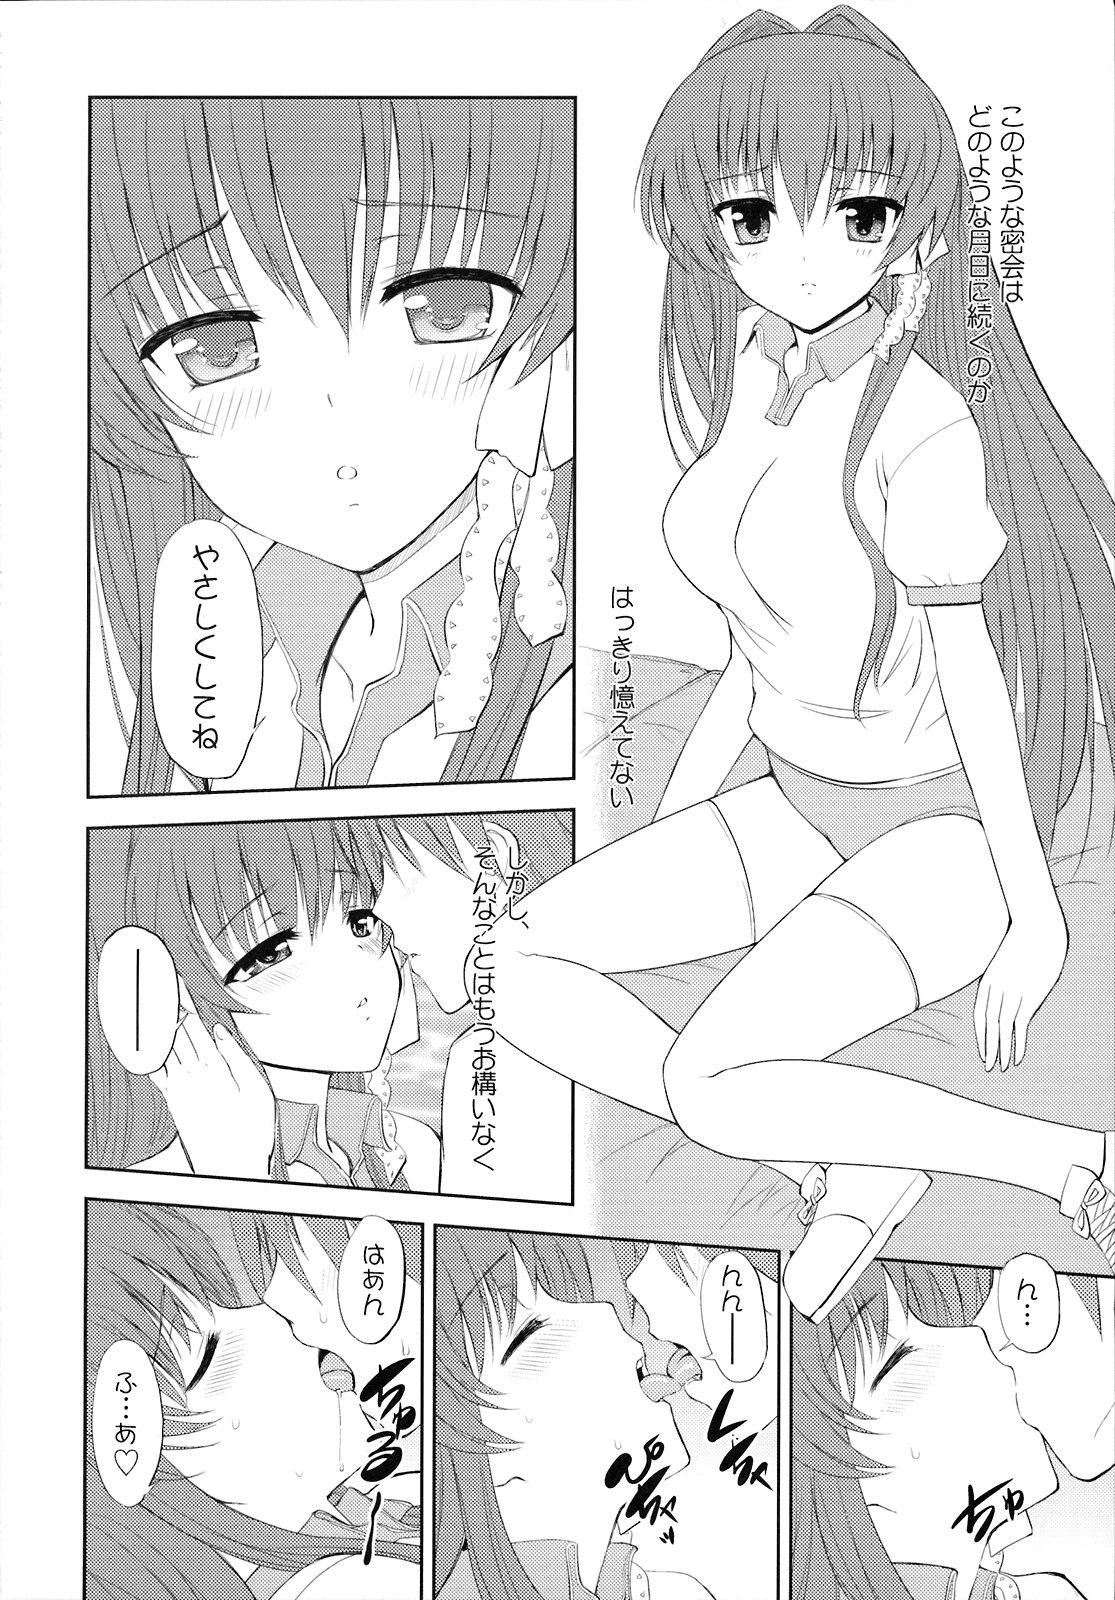 Blowjob KYOU MANIA - Clannad Indoor - Page 5